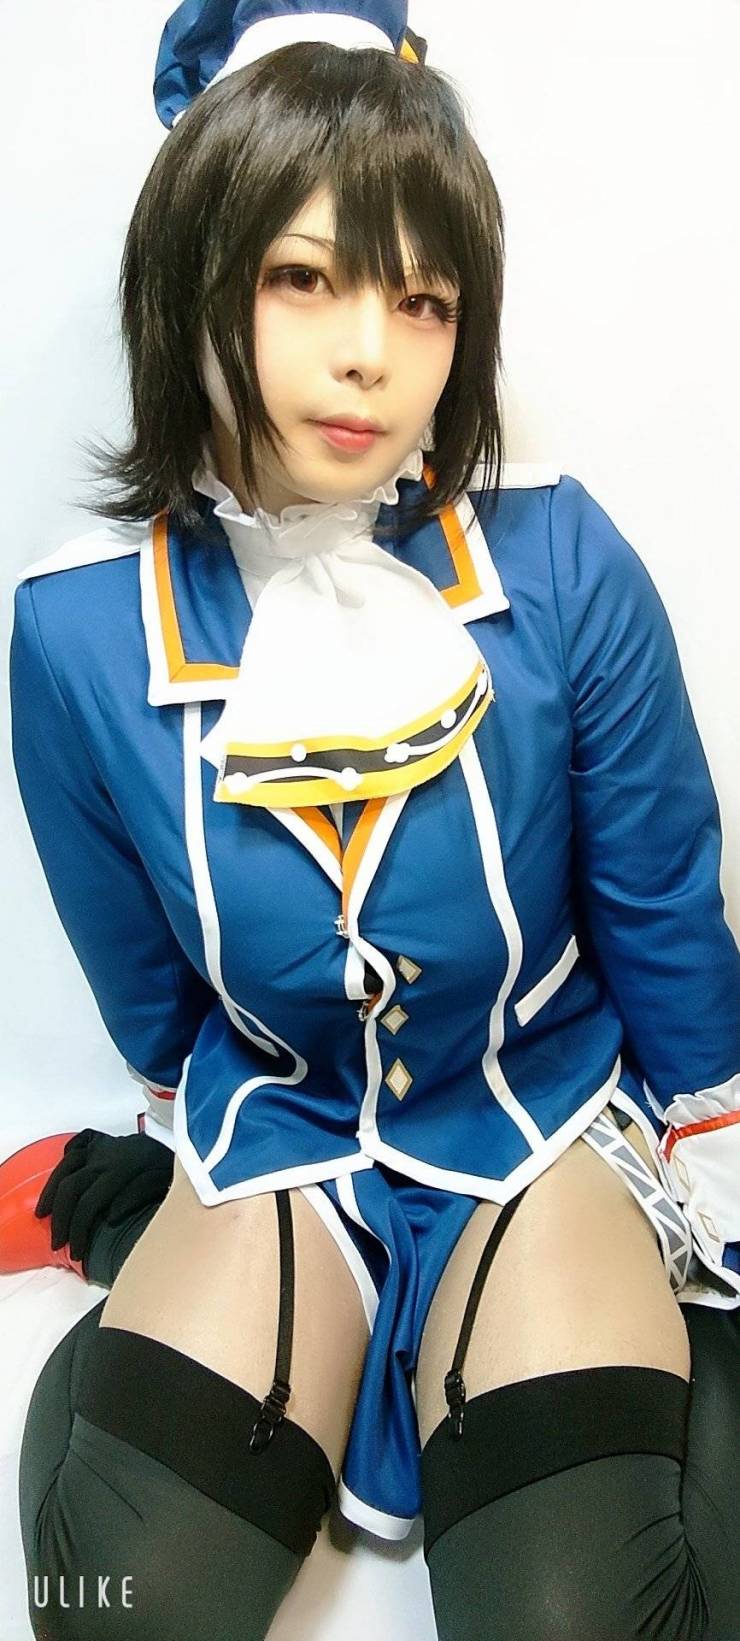 This Cosplayer Girl Is Actually A 30-Year-Old Guy!